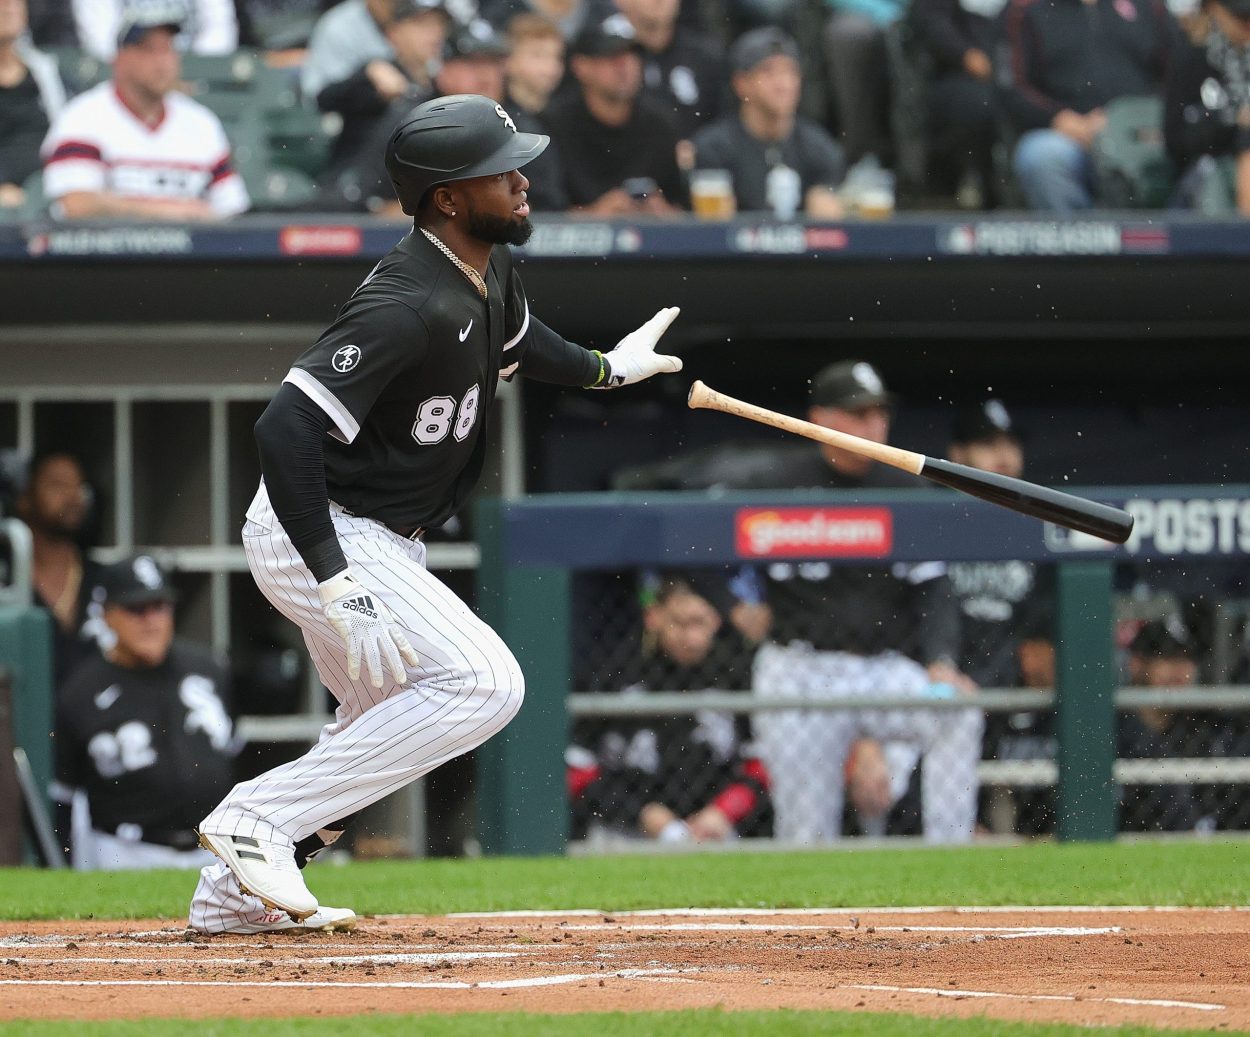 Chicago White Sox outfielder Luis Robert after batting against the Houston Astros during the 2021 MLB Playoffs